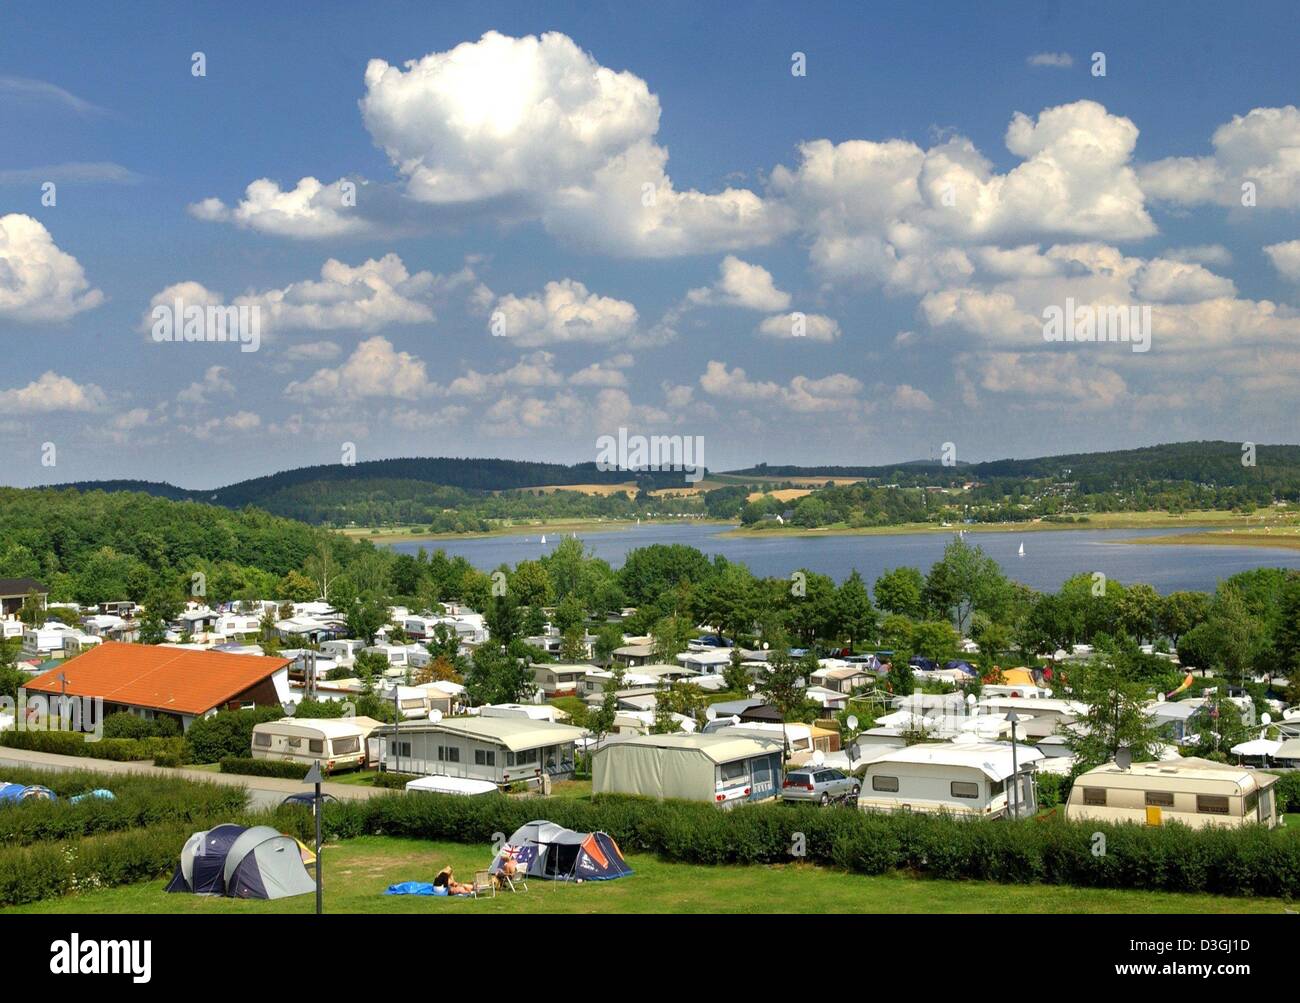 (dpa) - A view of the Gunzenberg camping site near Poehl dam, eastern Germany, 5 August 2004. The reservoir lake is one of the most attractive destinations for tourists in the Vogtland region. Stock Photo